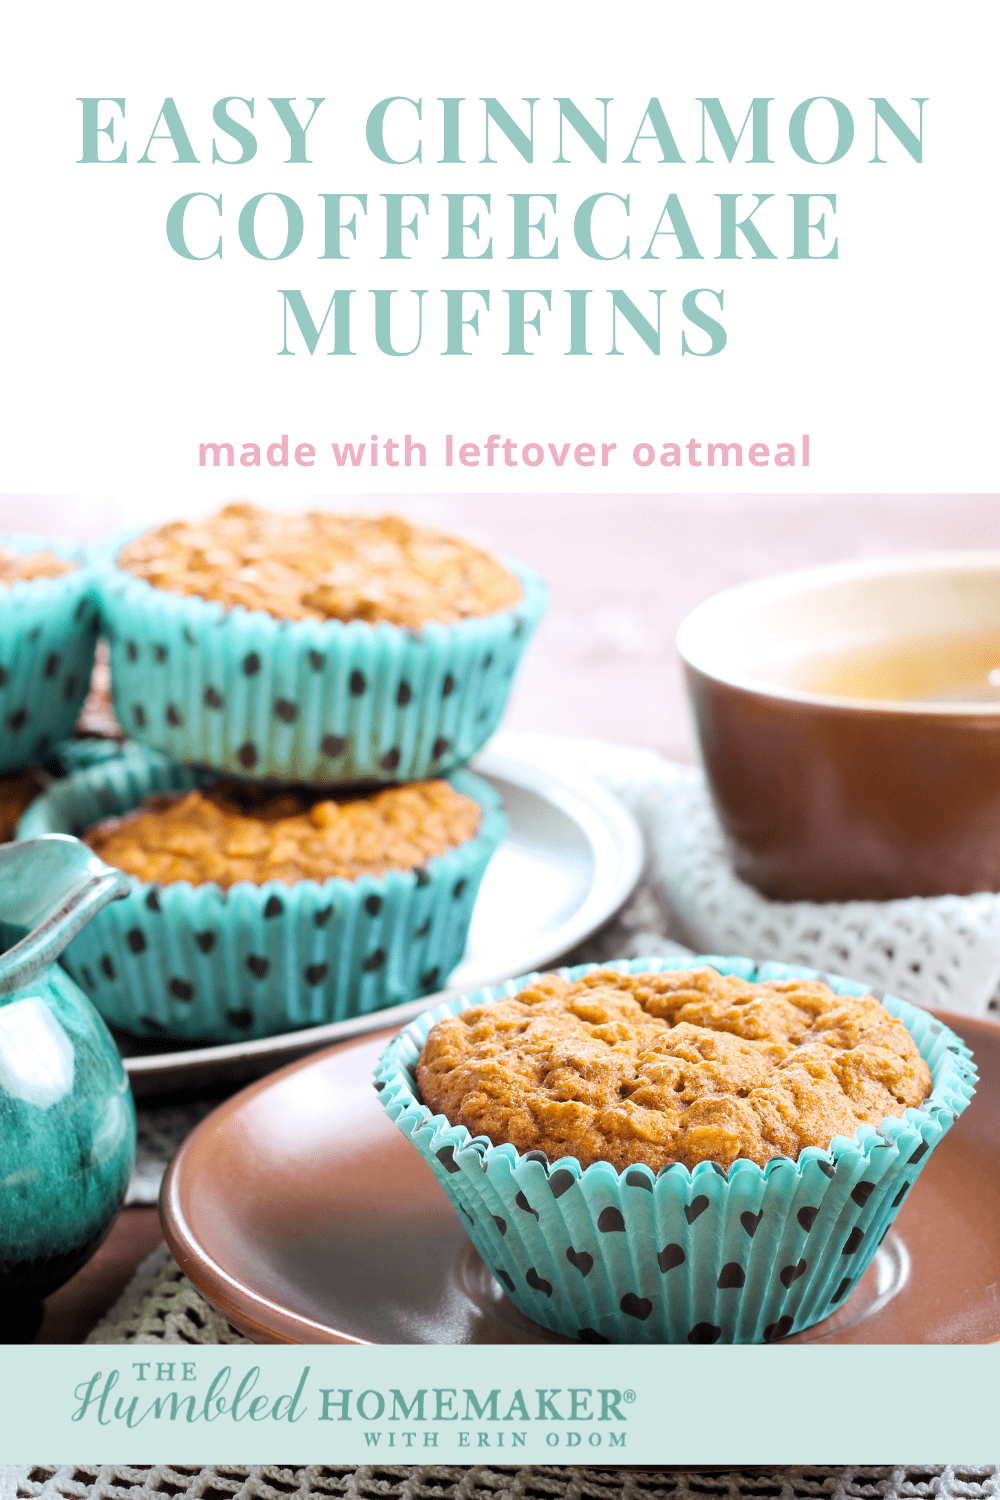 Enjoy a delicious and frugal coffeecake muffin made with a hint of cinnamon. It’s a great way to use up leftover oatmeal. Great for breakfast on the go!